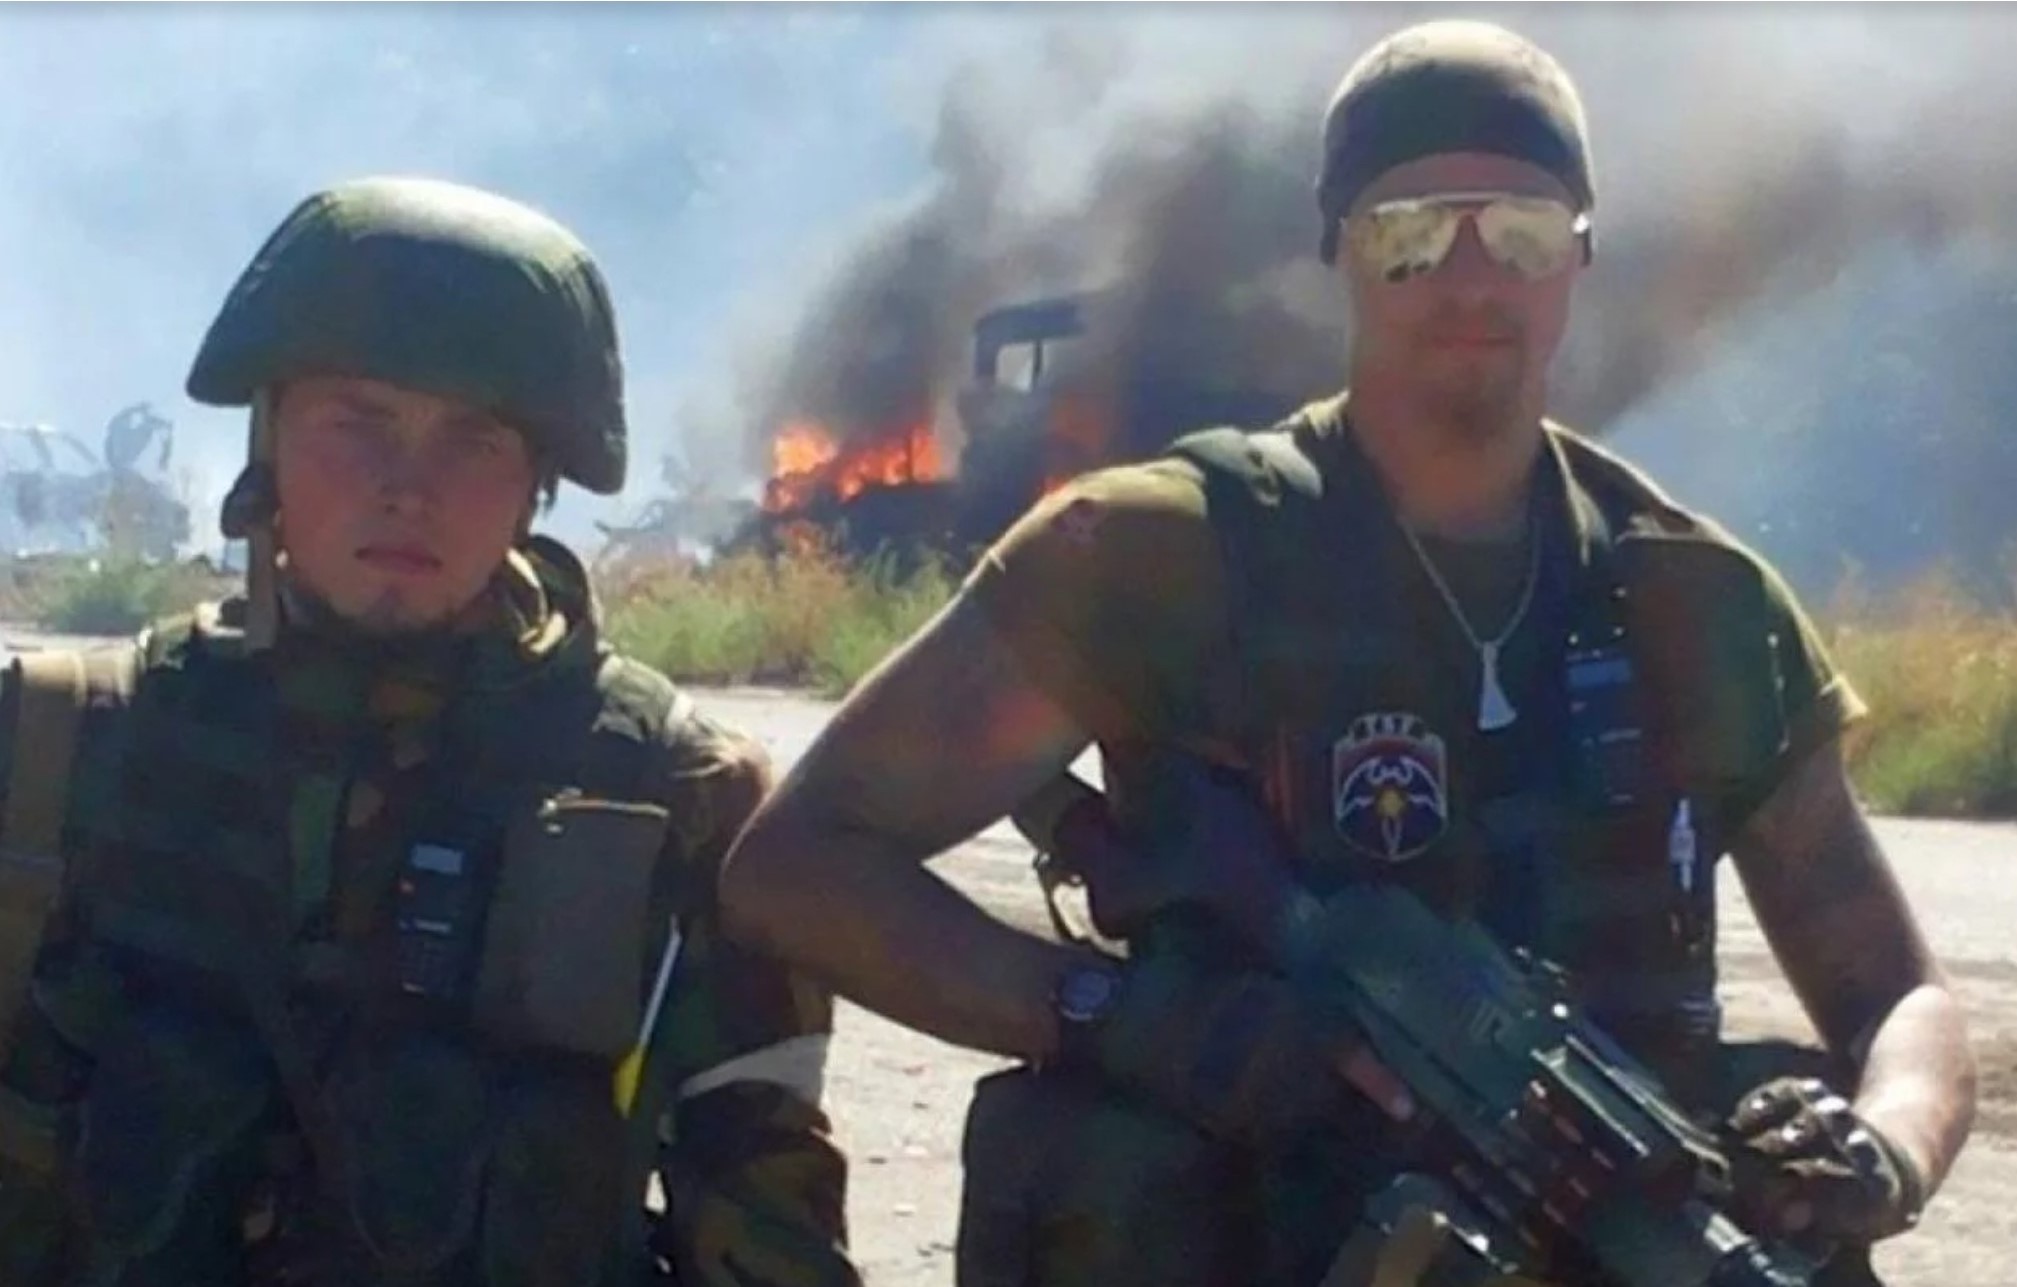 From left Alexei Milchakov and Yan Petrovsky in Donbas, 2014